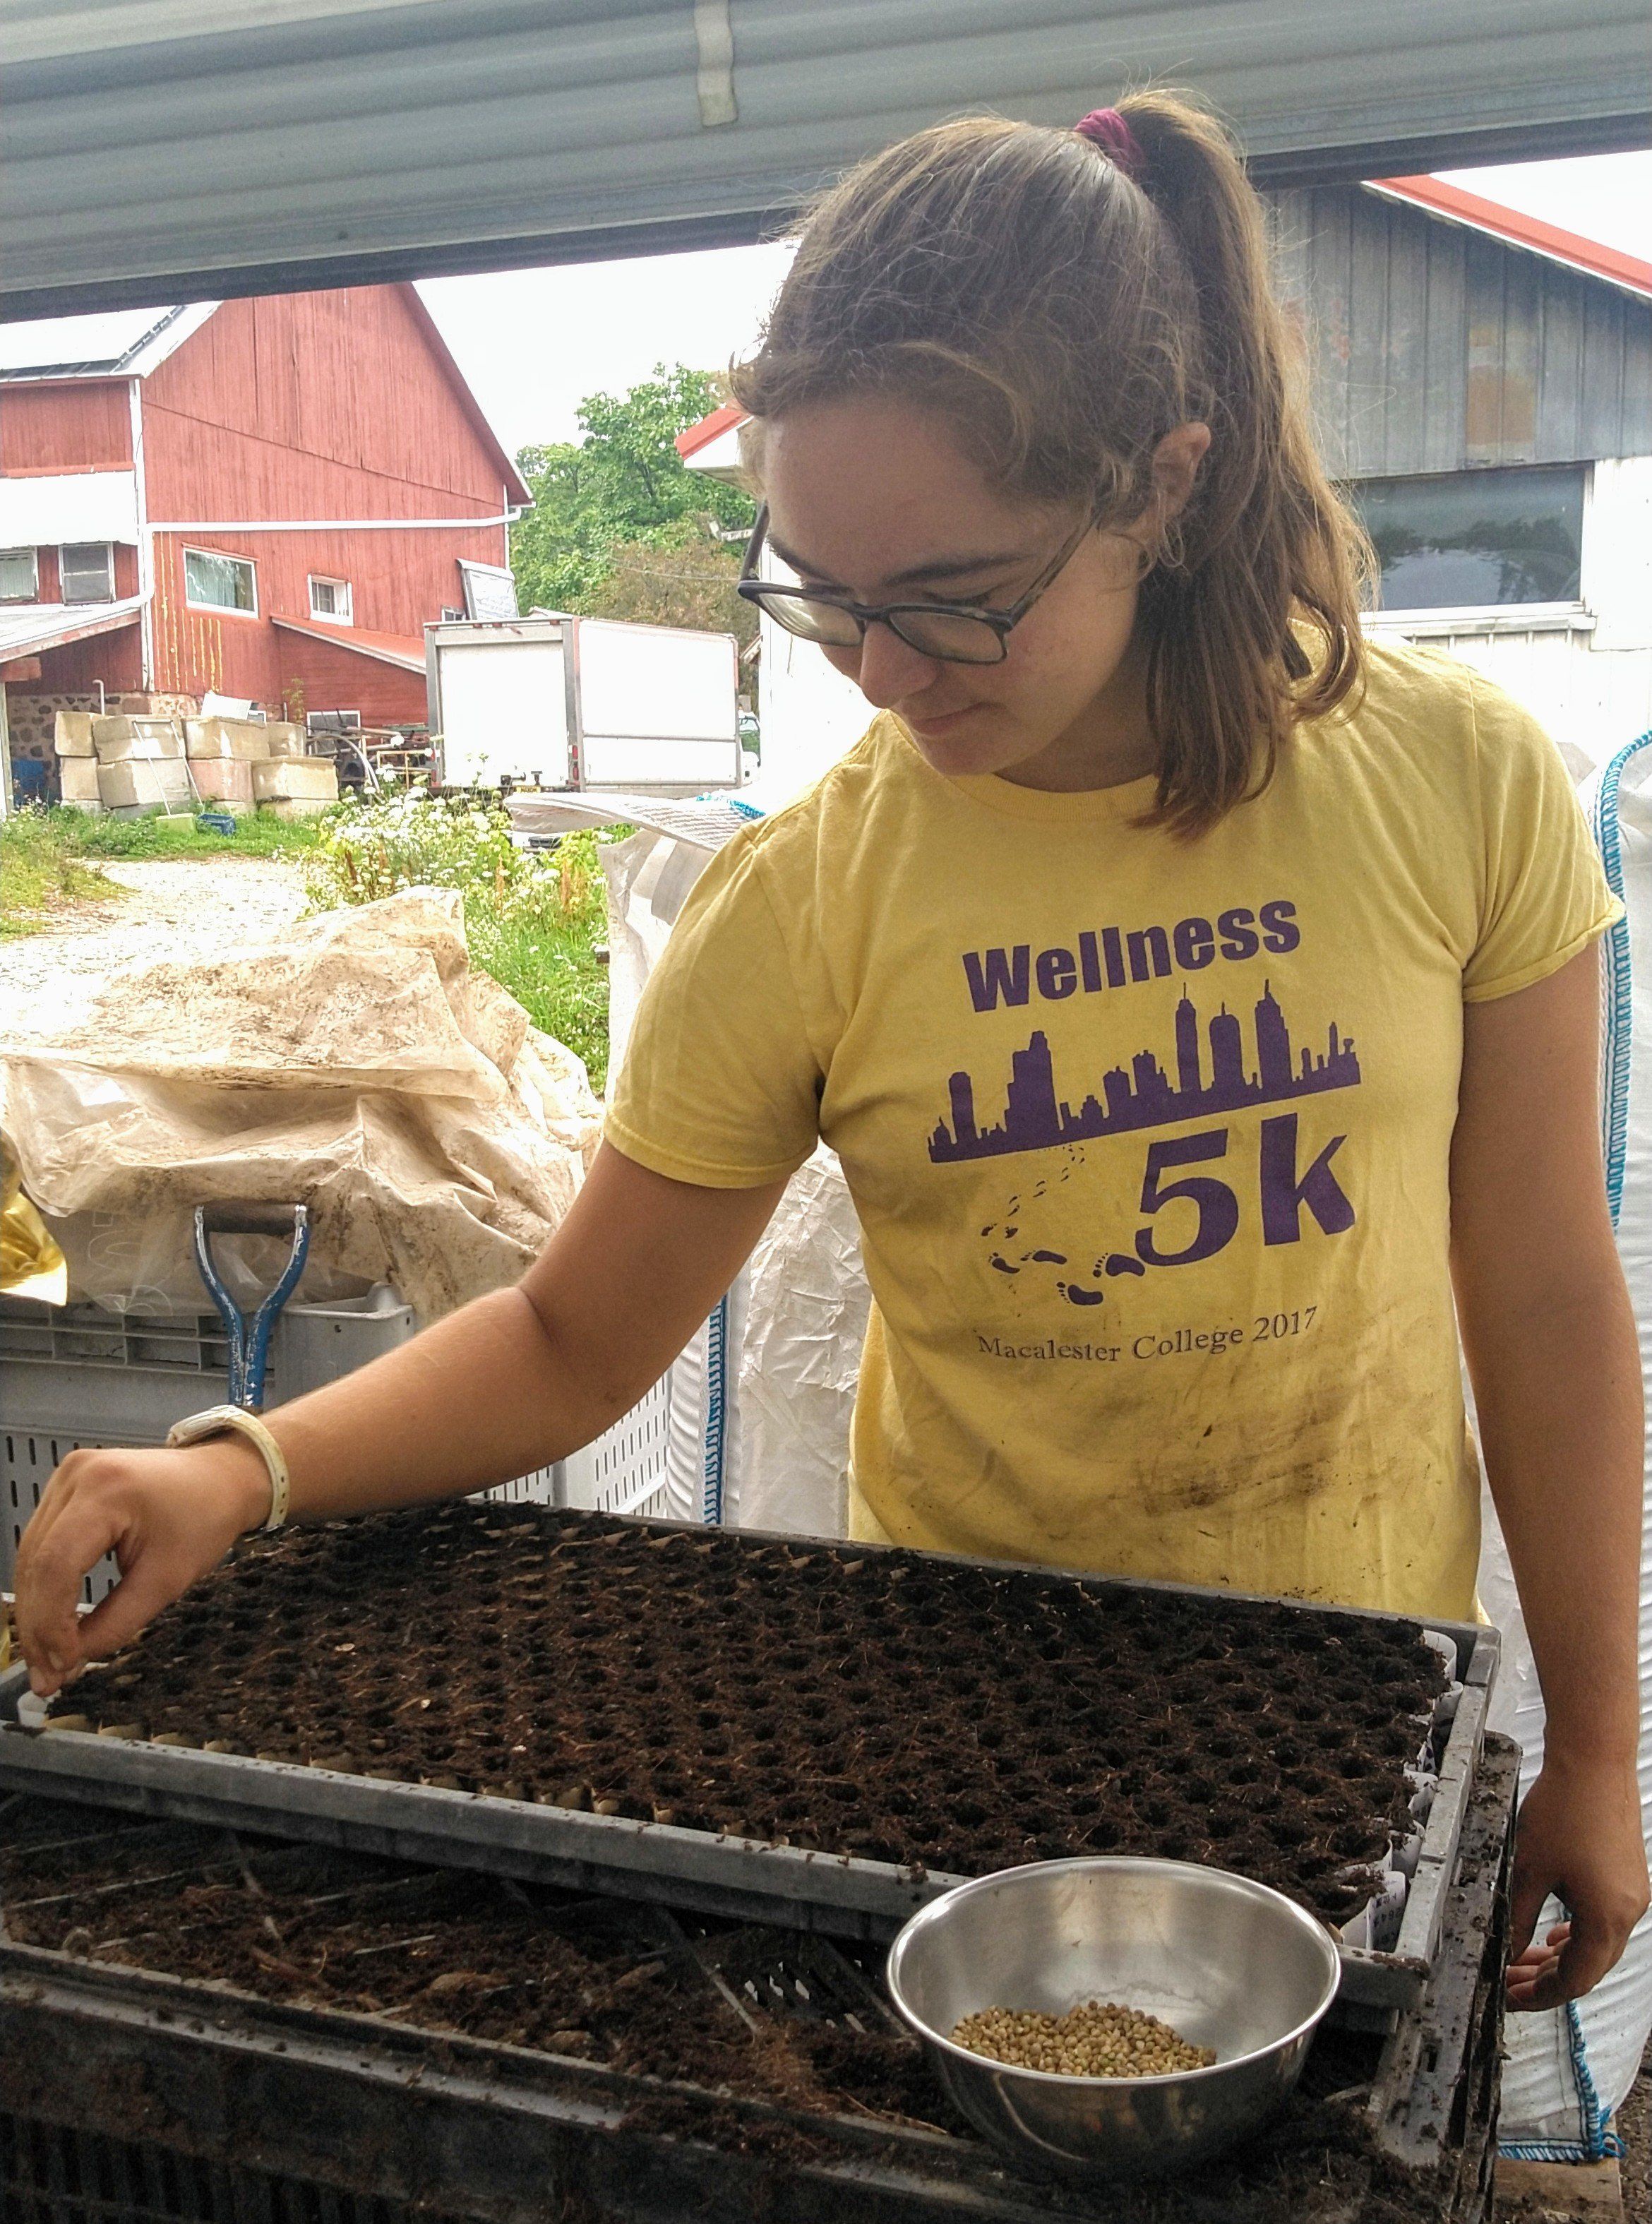 Previous Happening: Farm Happenings for August 11, 2020